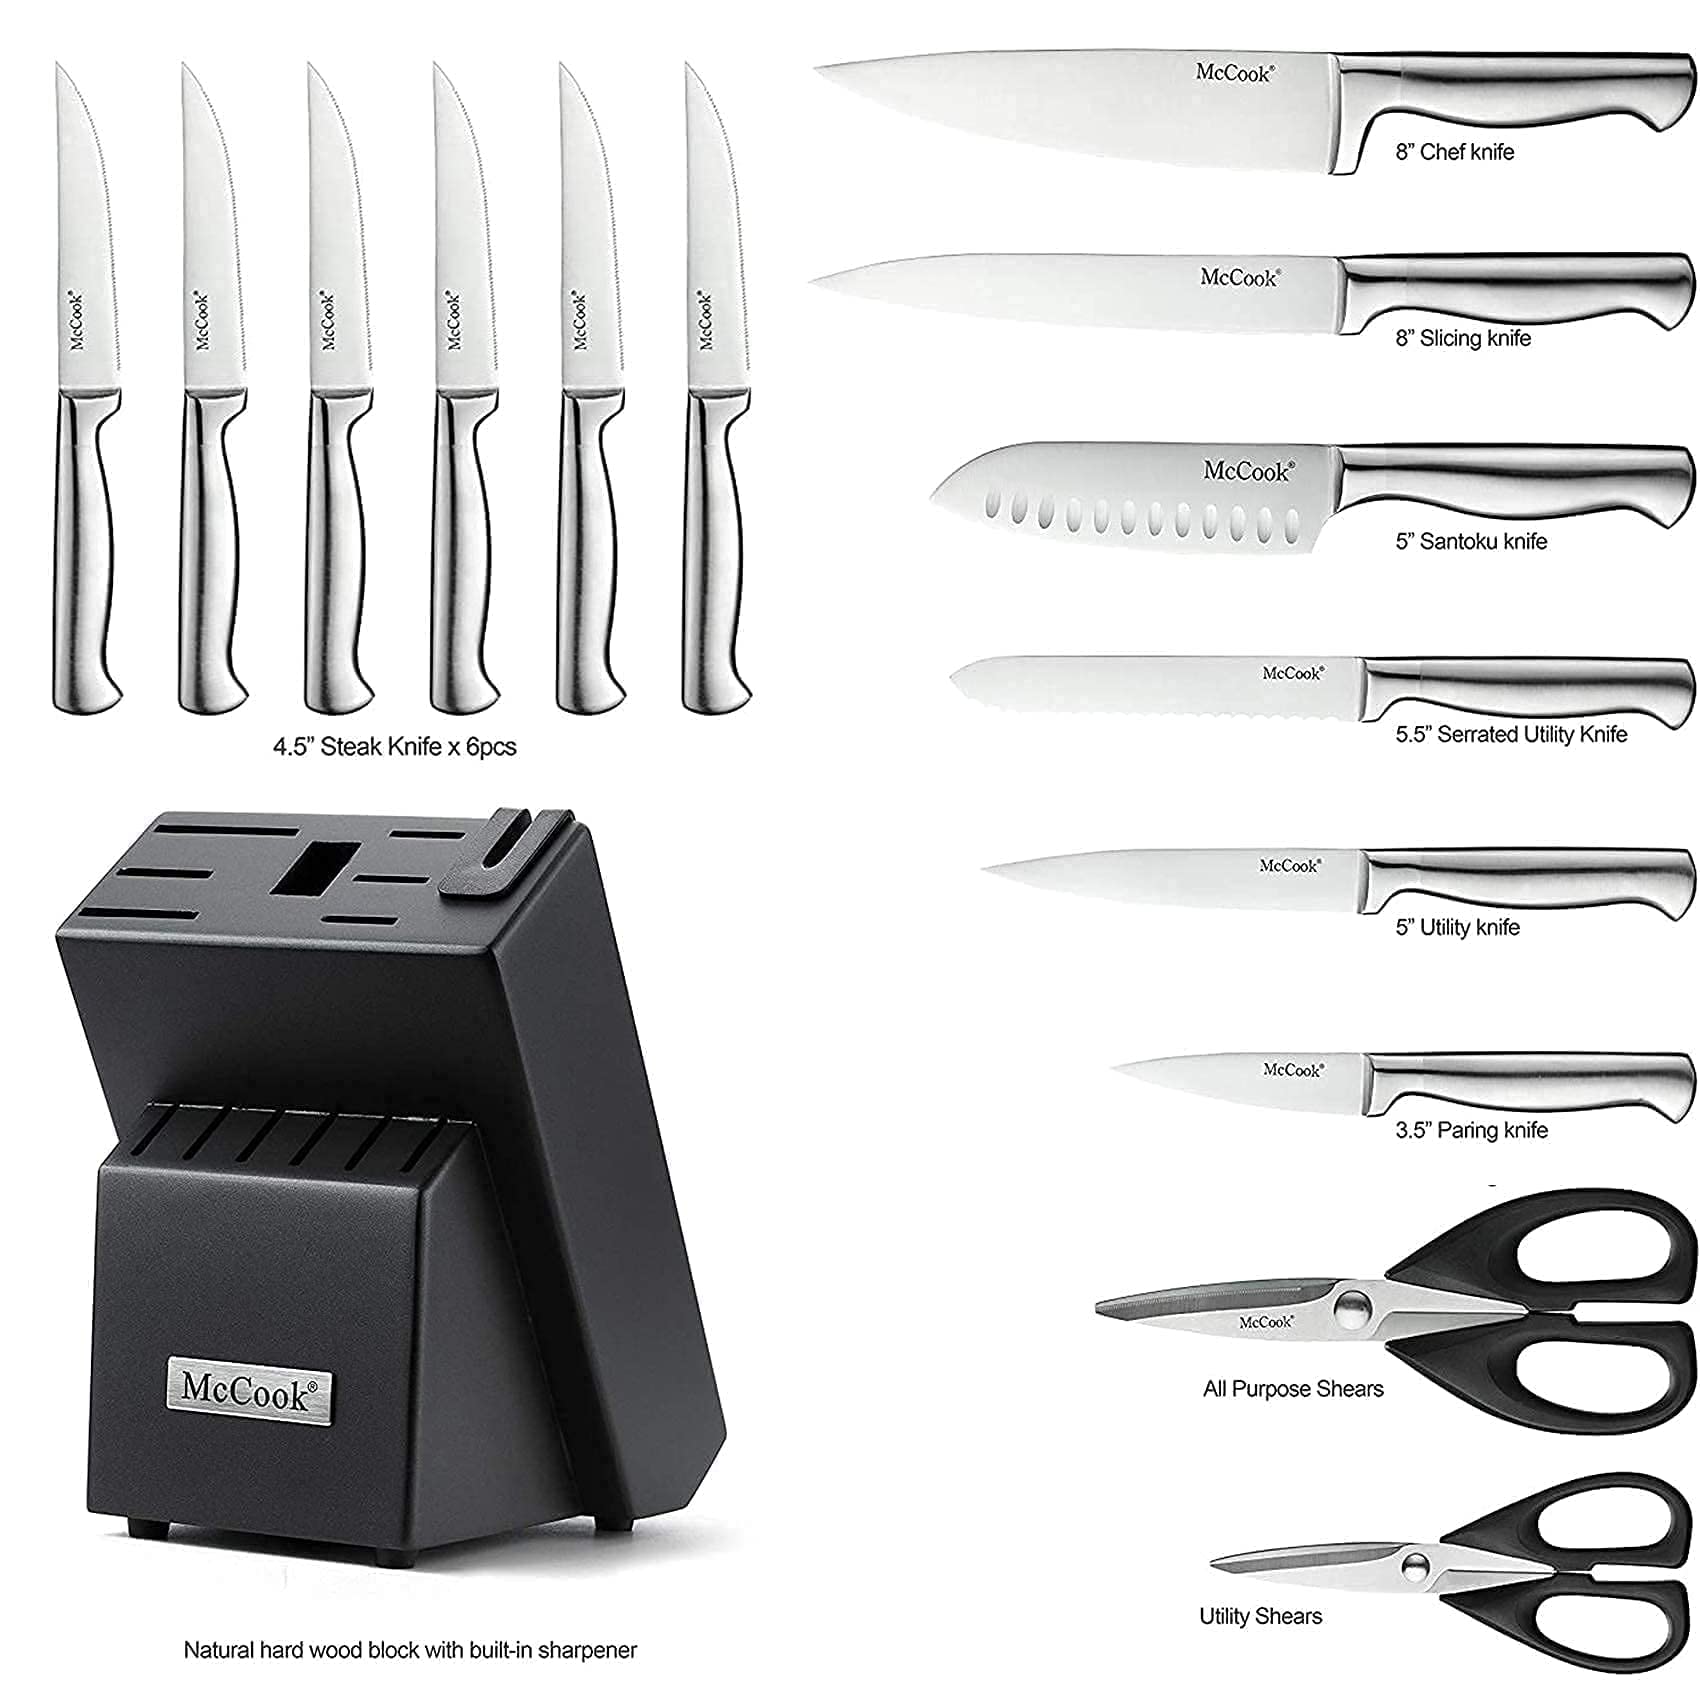 McCook MC21 German Stainless Steel Knife Block Sets with Built-in Sharpener + MCW12 Bamboo Cutting Board(Large, 17”x12”x1”)